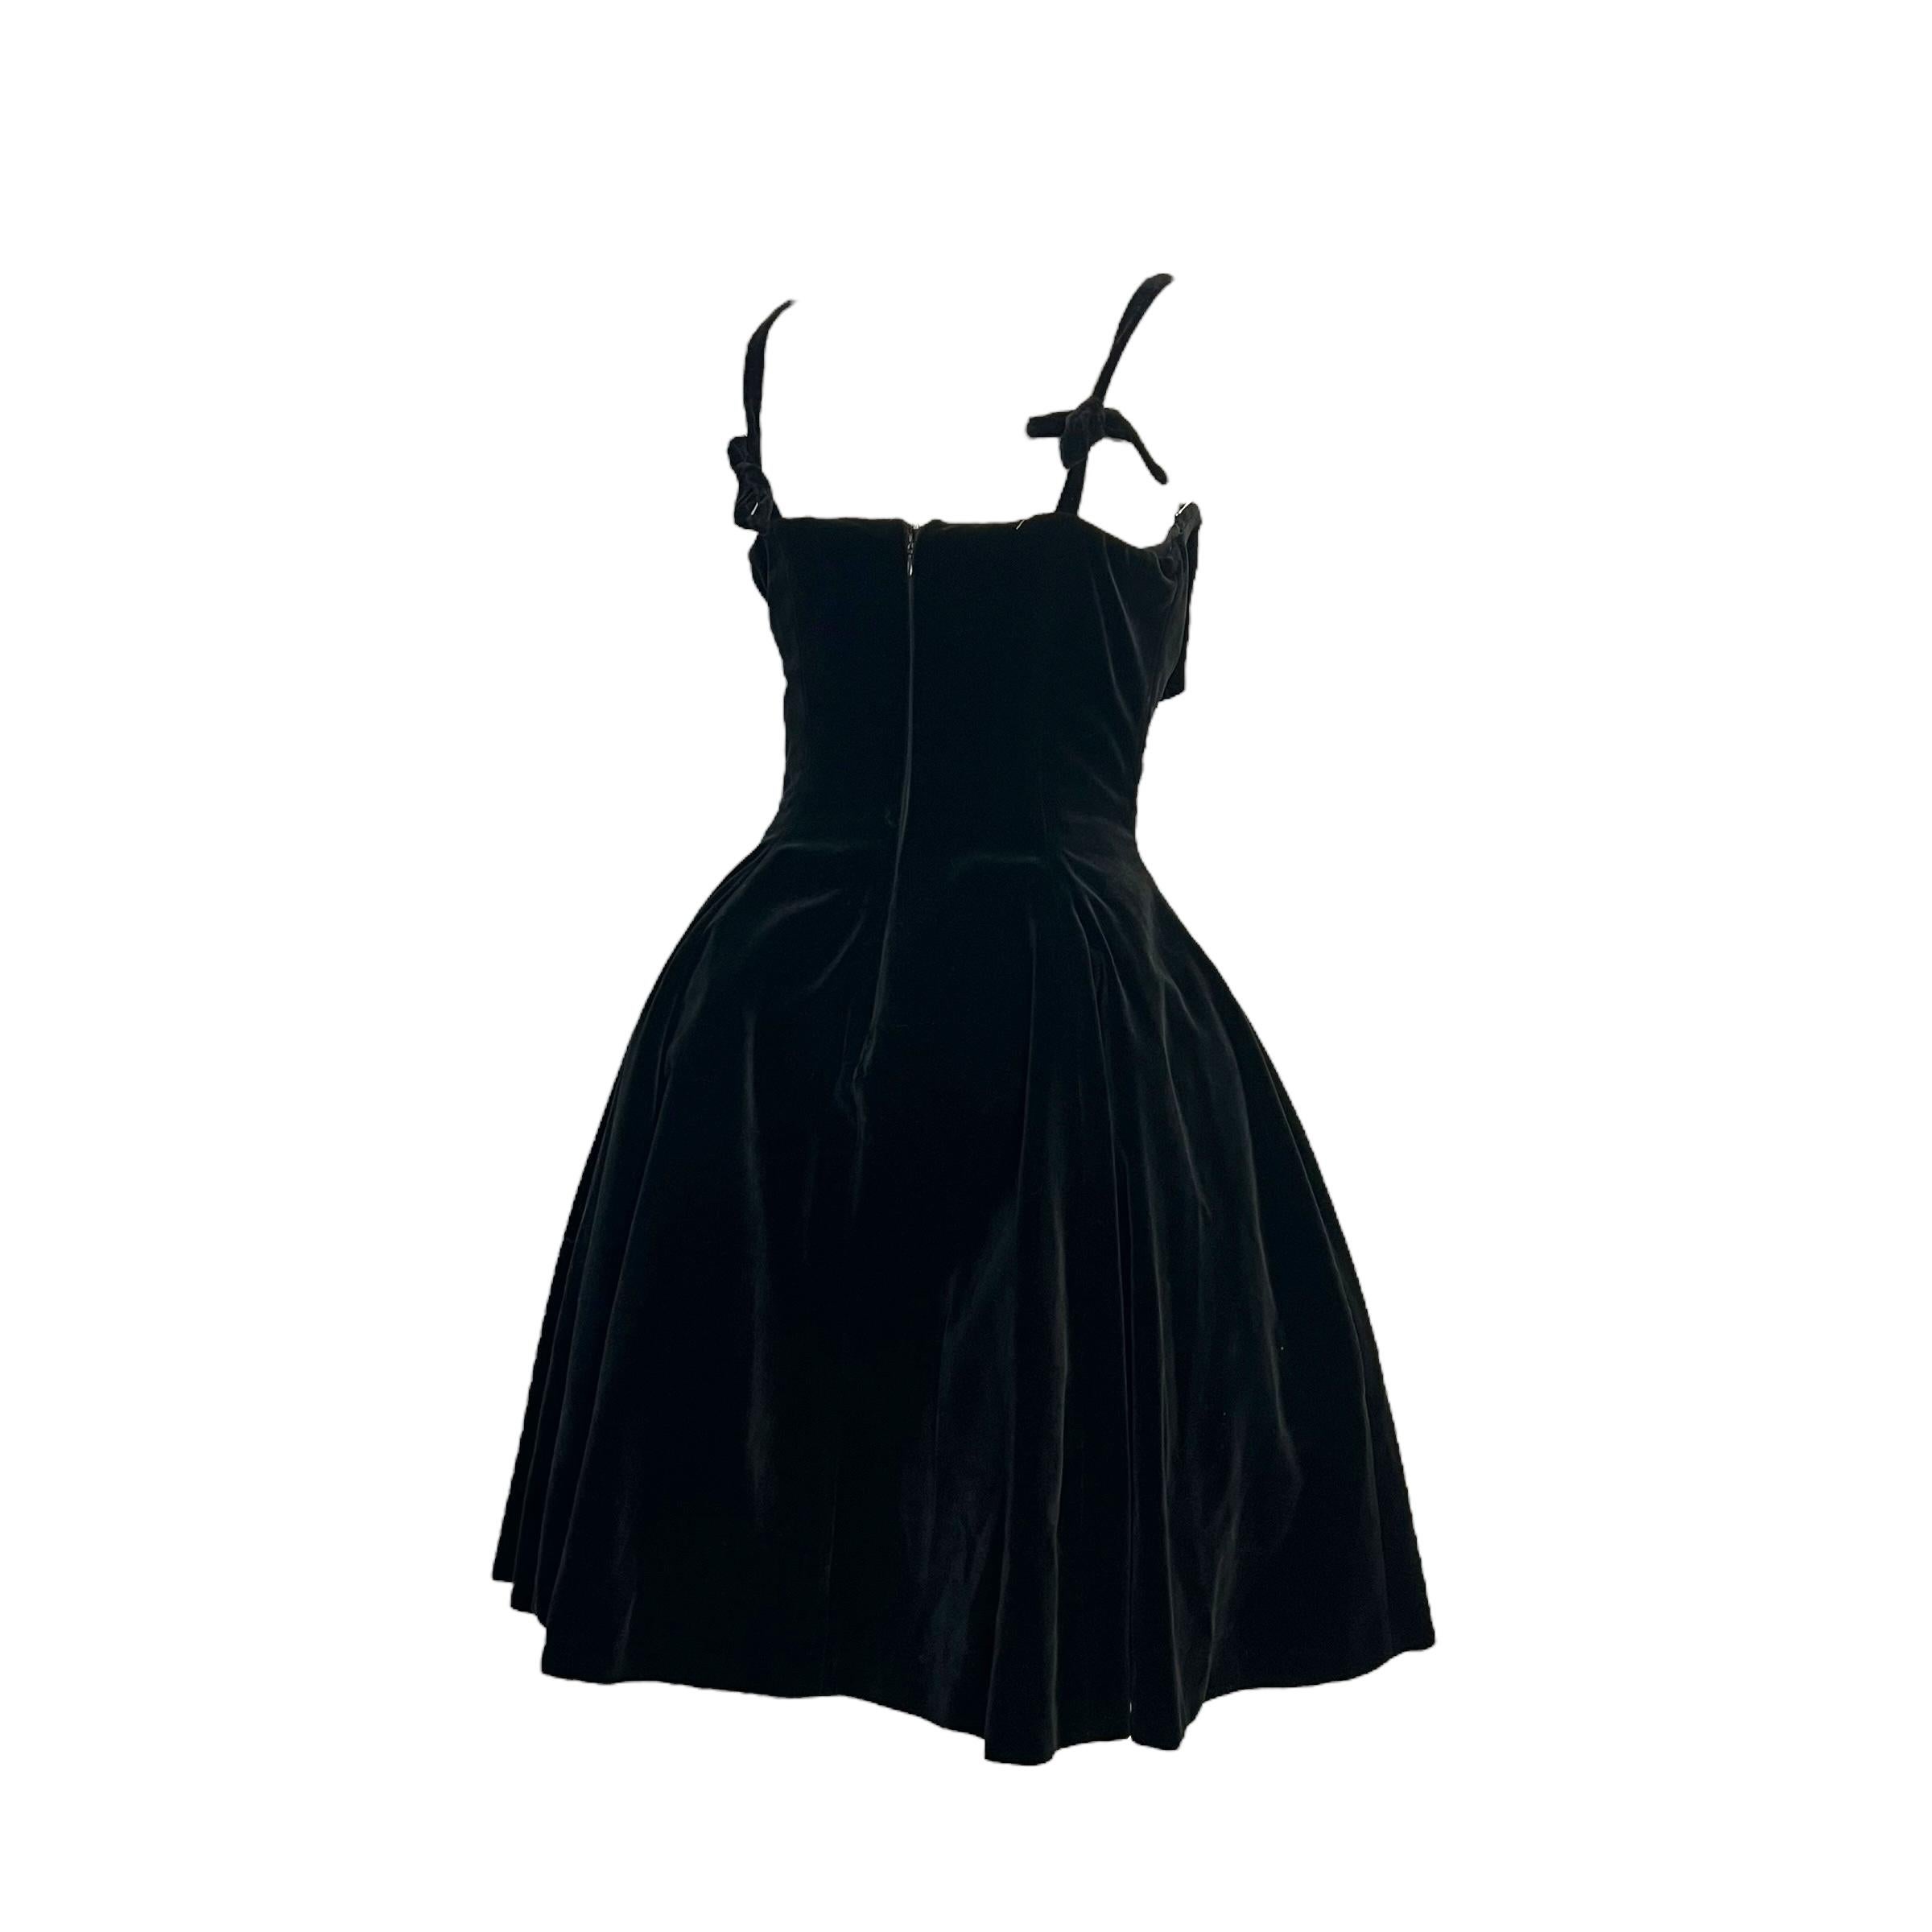 Vivienne Westwood 1999 velvet bow dress, with hip pads 2